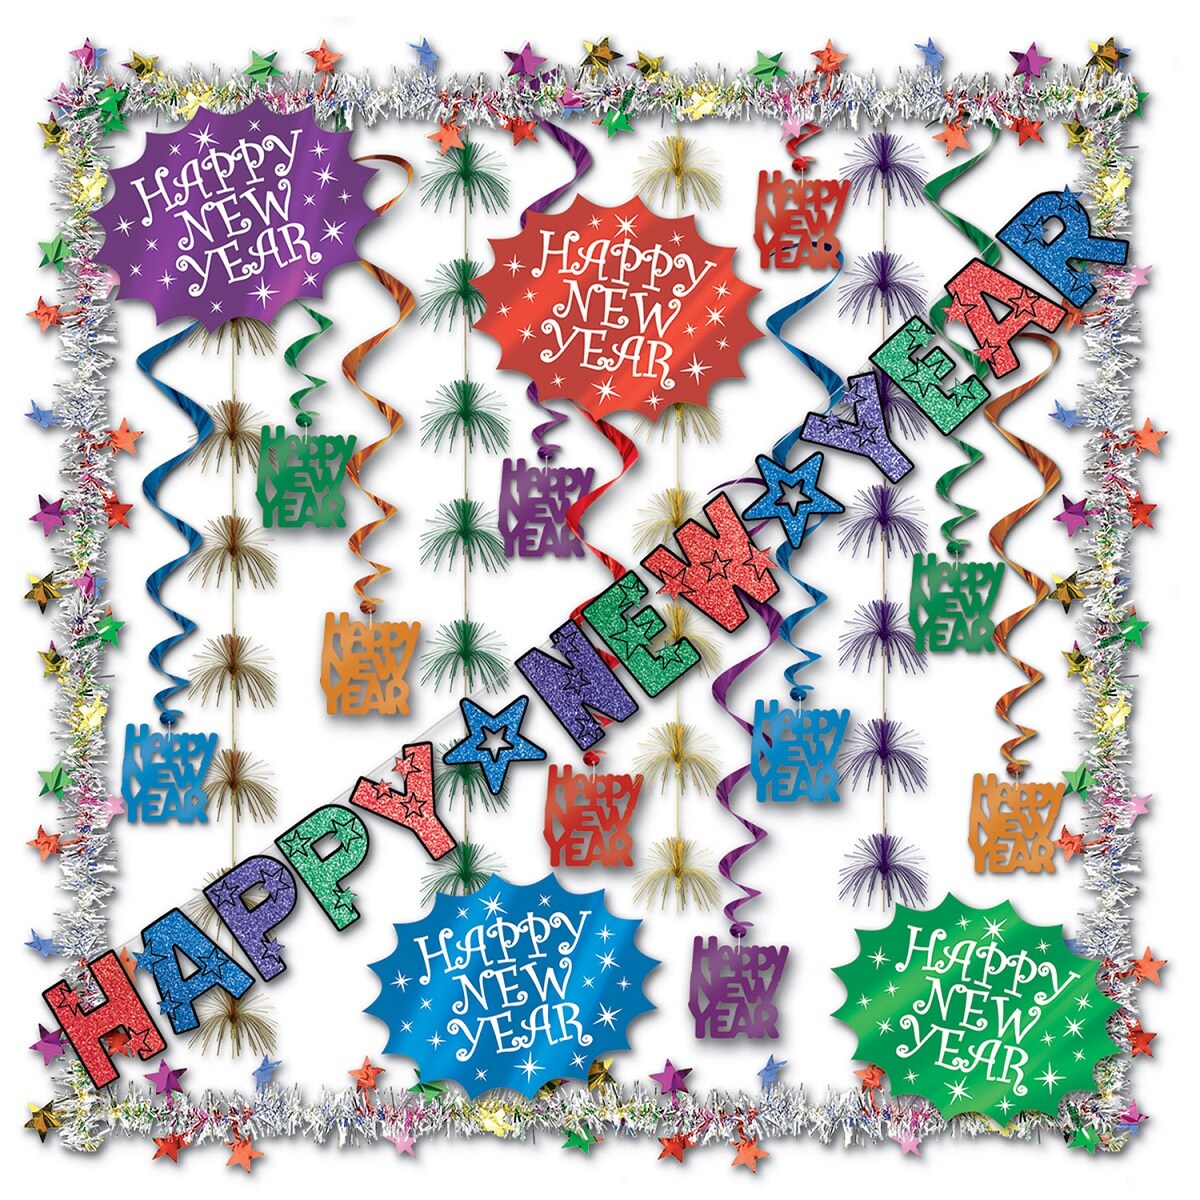 Beistle Vibrantly Colored Glittered New Year&#x27;s Eve Party Decoration Kit